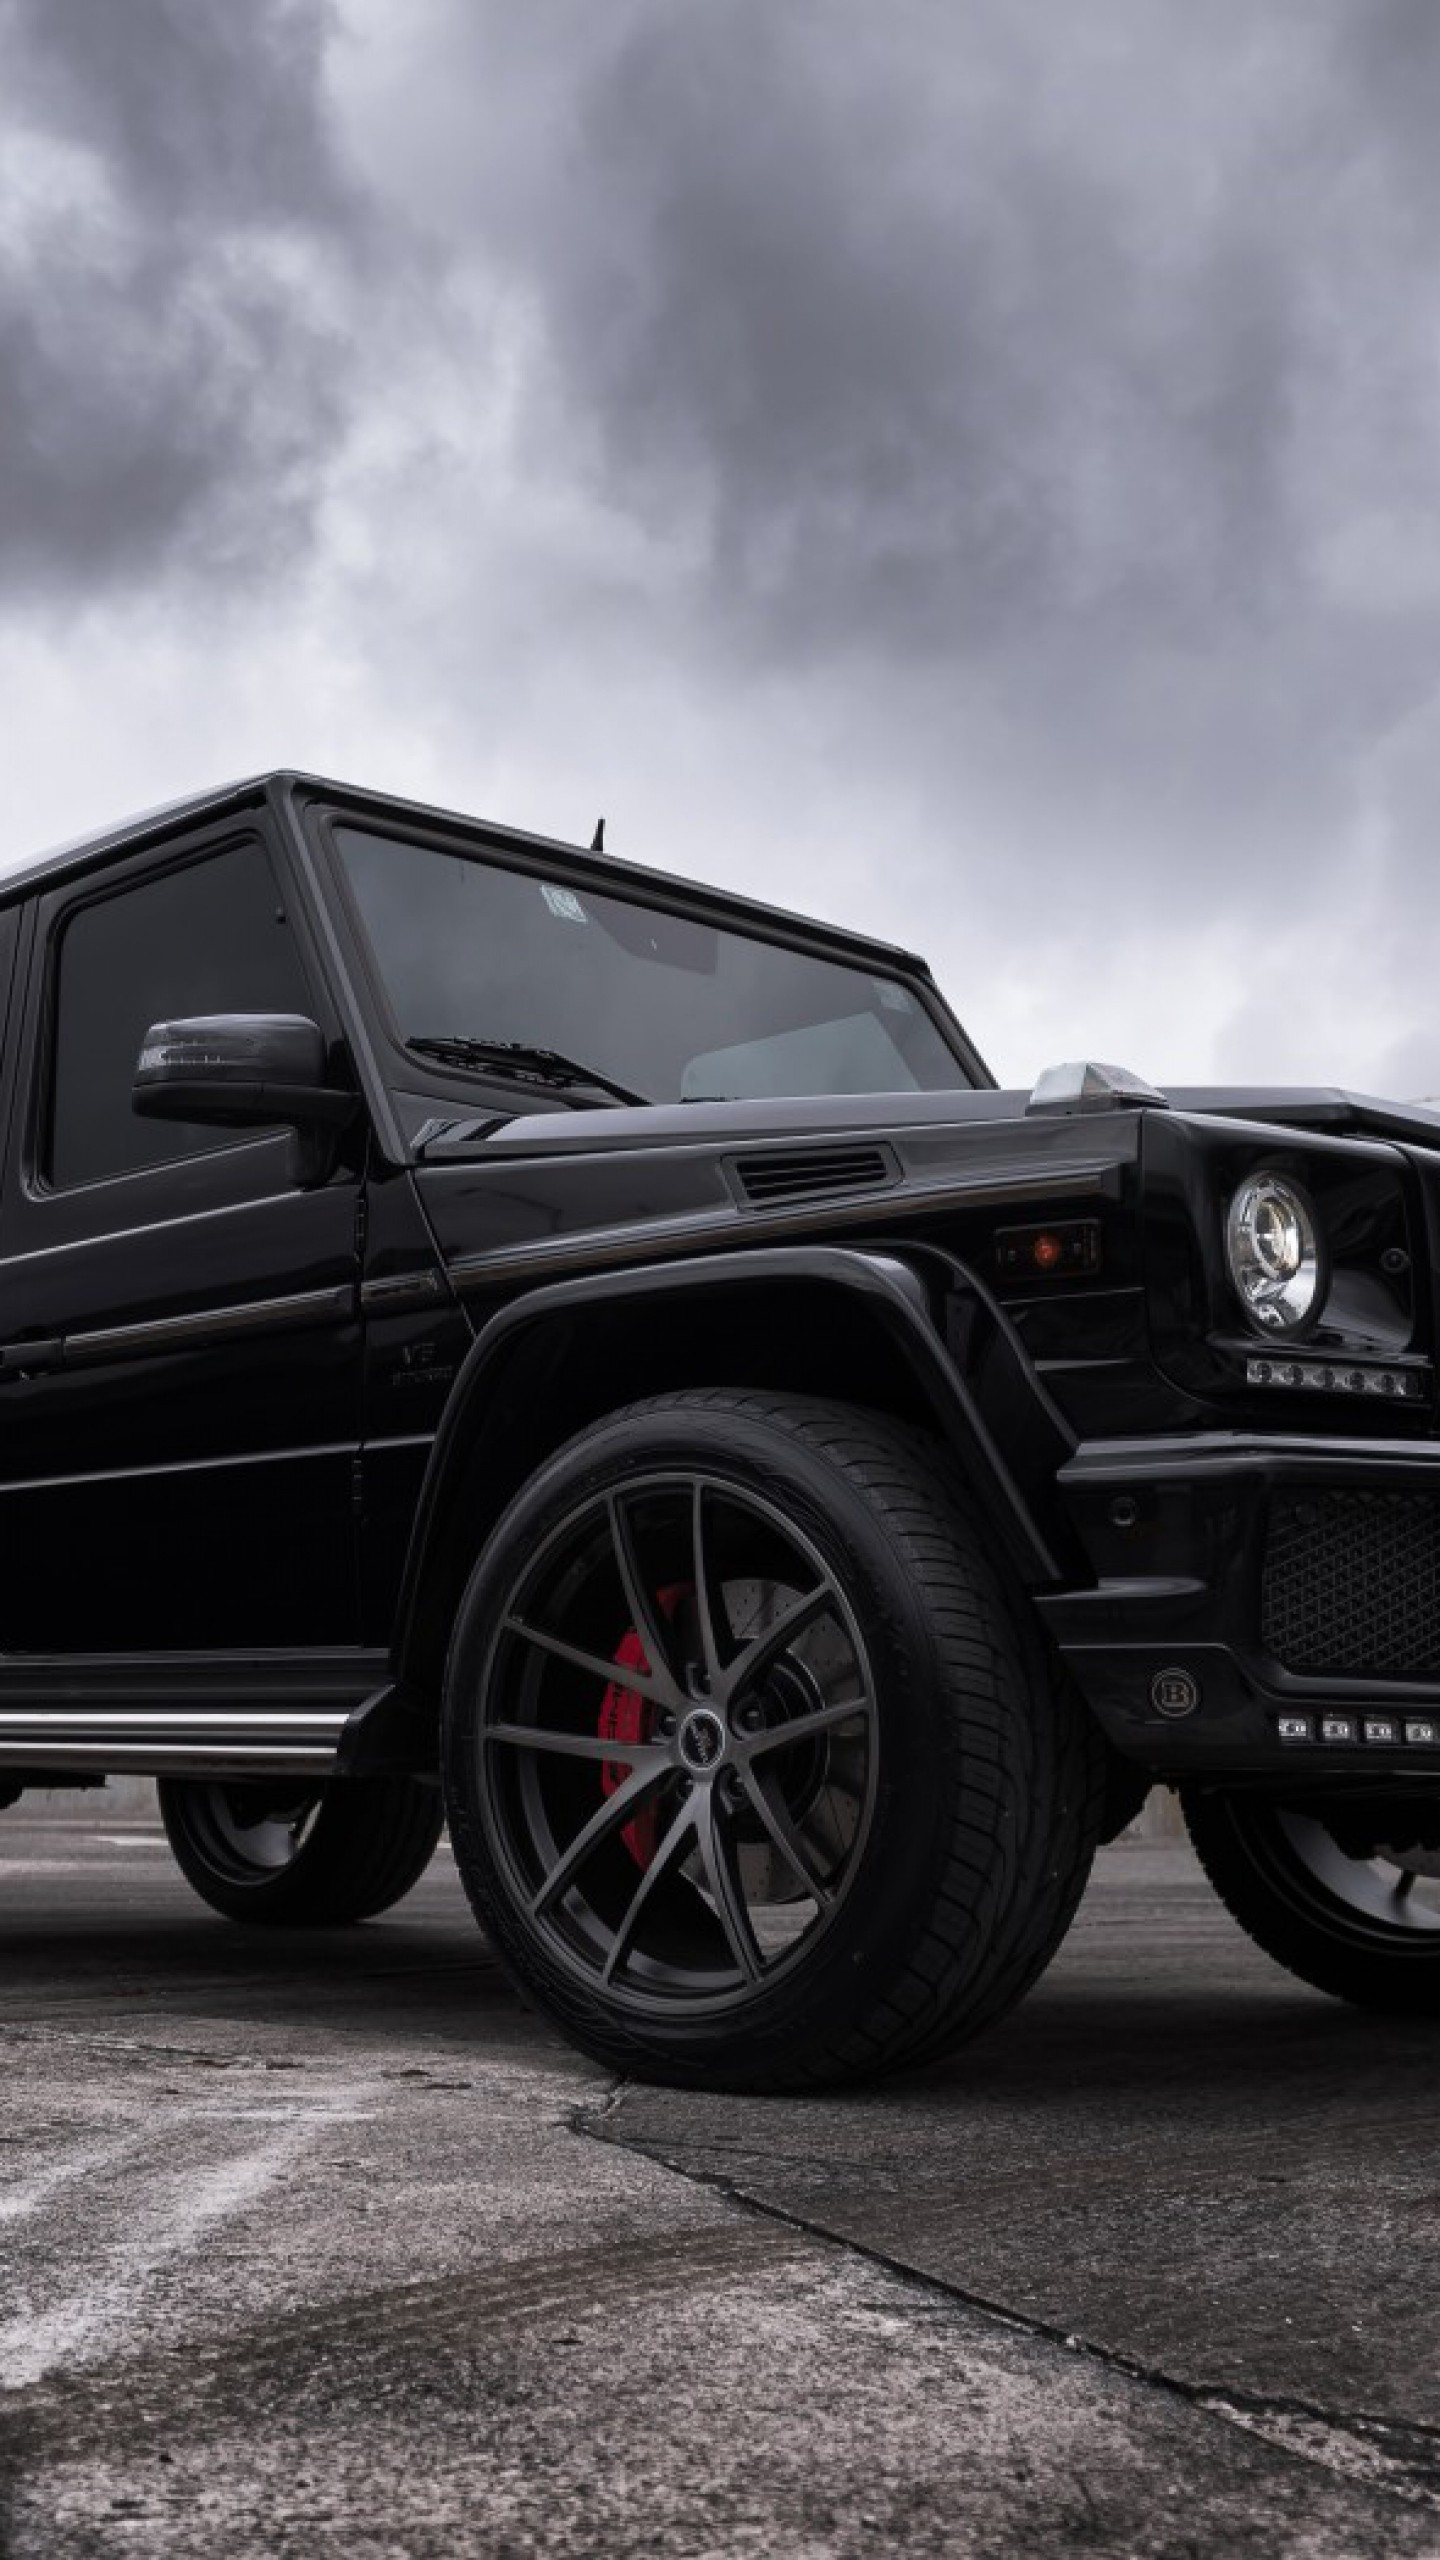 1440x2560 Black Jeep Best Hd Wallpaper For Iphone And Android Devices